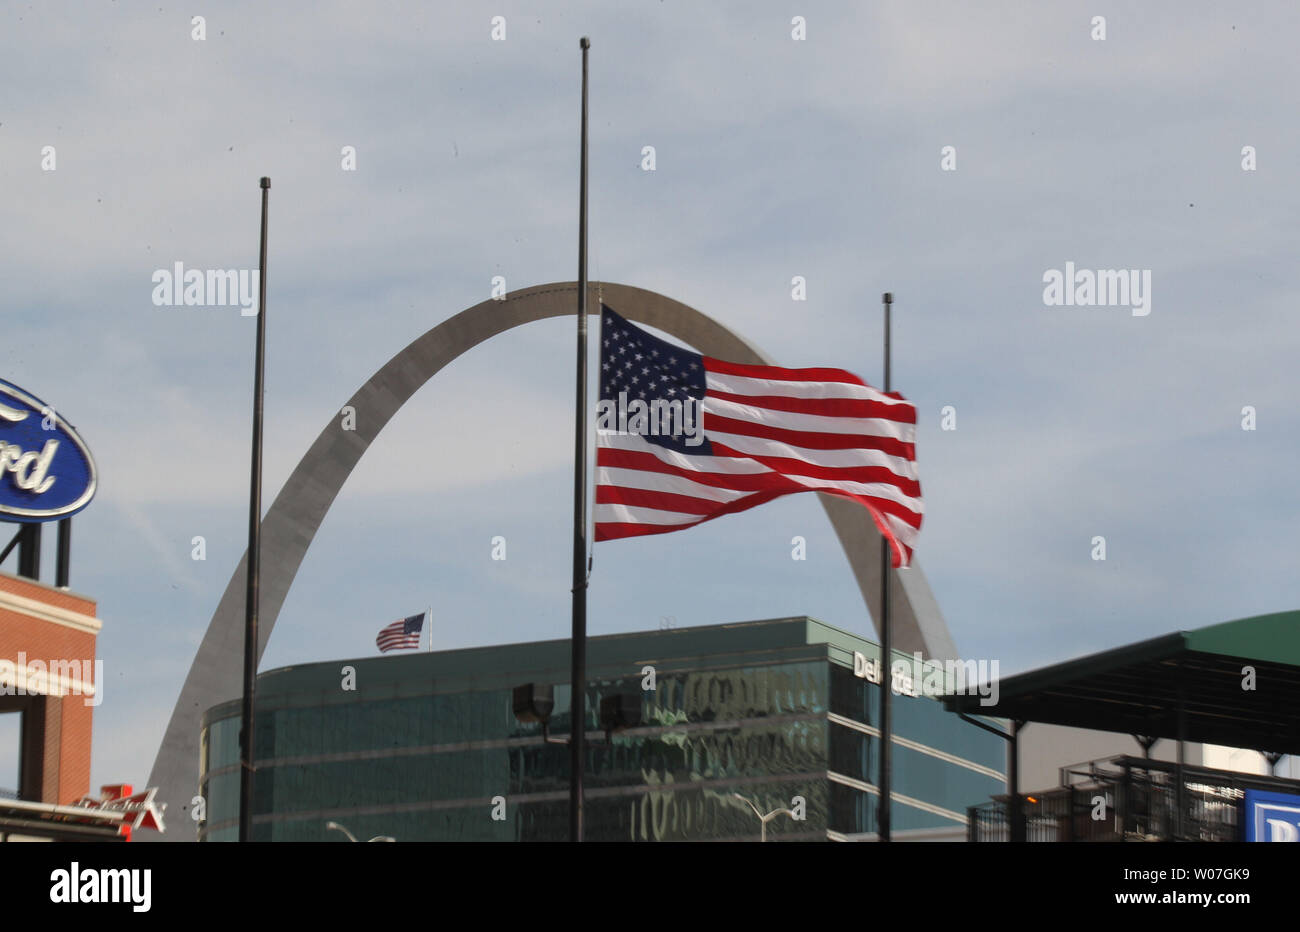 The American flag blows in the wind at half staff in the shadow of the Gateway Arch inside Busch Stadium in St. Louis on October 27, 2014. Fans have left flowers, candles, photos, baseballs and other mementos near the Stan Musial statue after word spread that Oscar Taveras, the Cardinals 22 year-old  rookie right fielder was killed in a car accident with his girlfriend in the Dominician Republic on October 26, 2014. Taveras hit a home run in the NLCS against the San Francisco Giants on October 12. 2014.  UPI/Bill Greenblatt Stock Photo